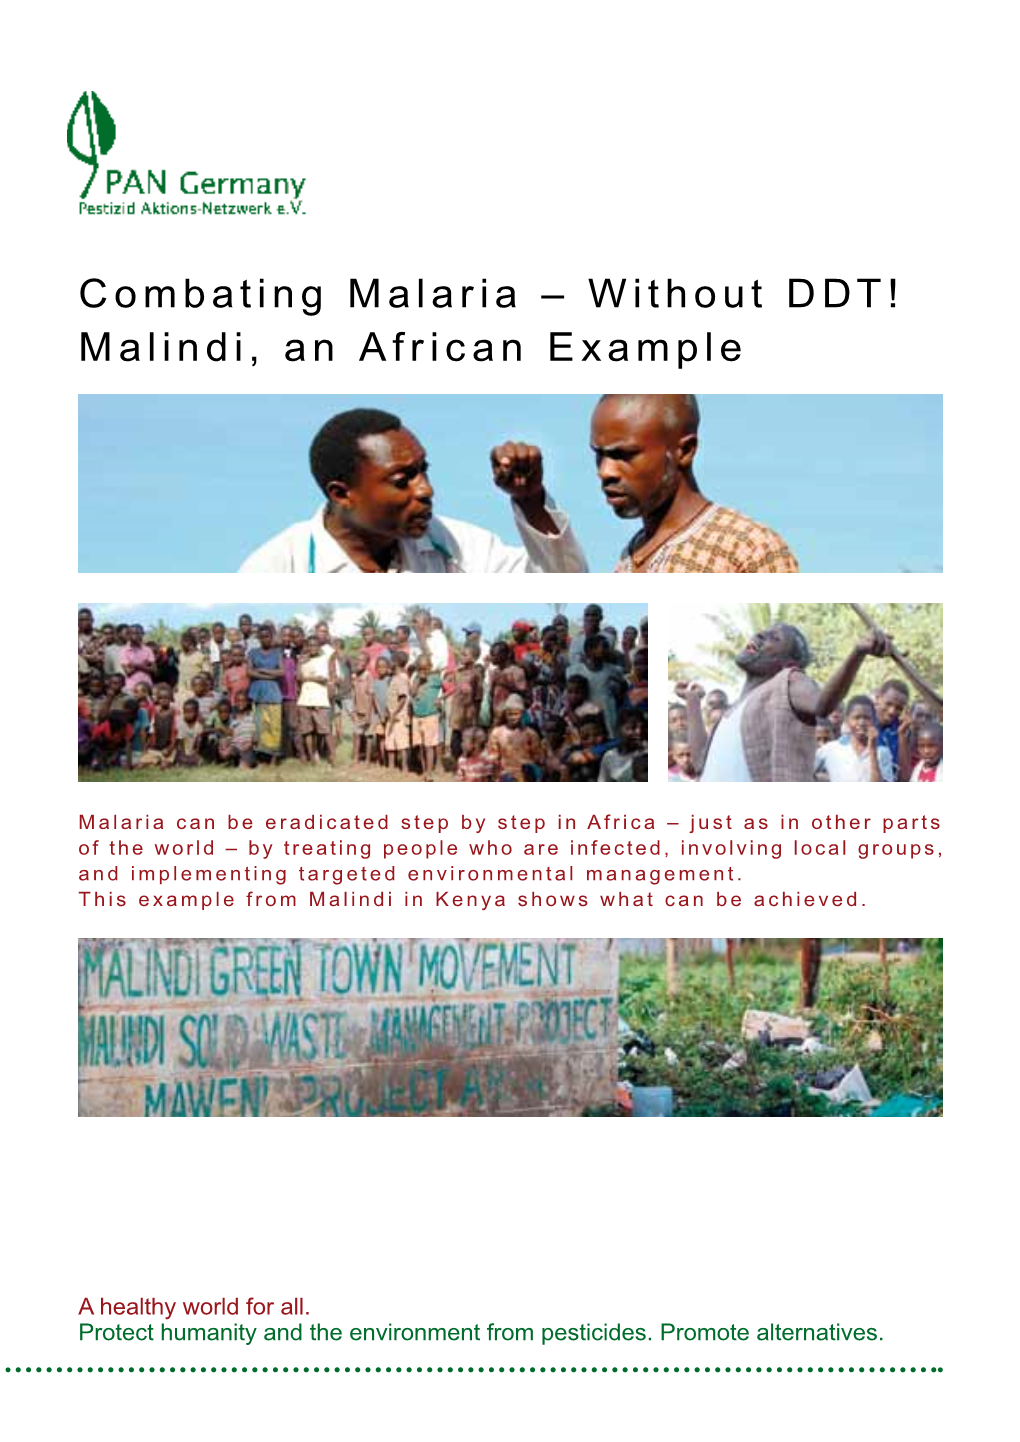 Combating Malaria – Without DDT! Malindi, an African Example